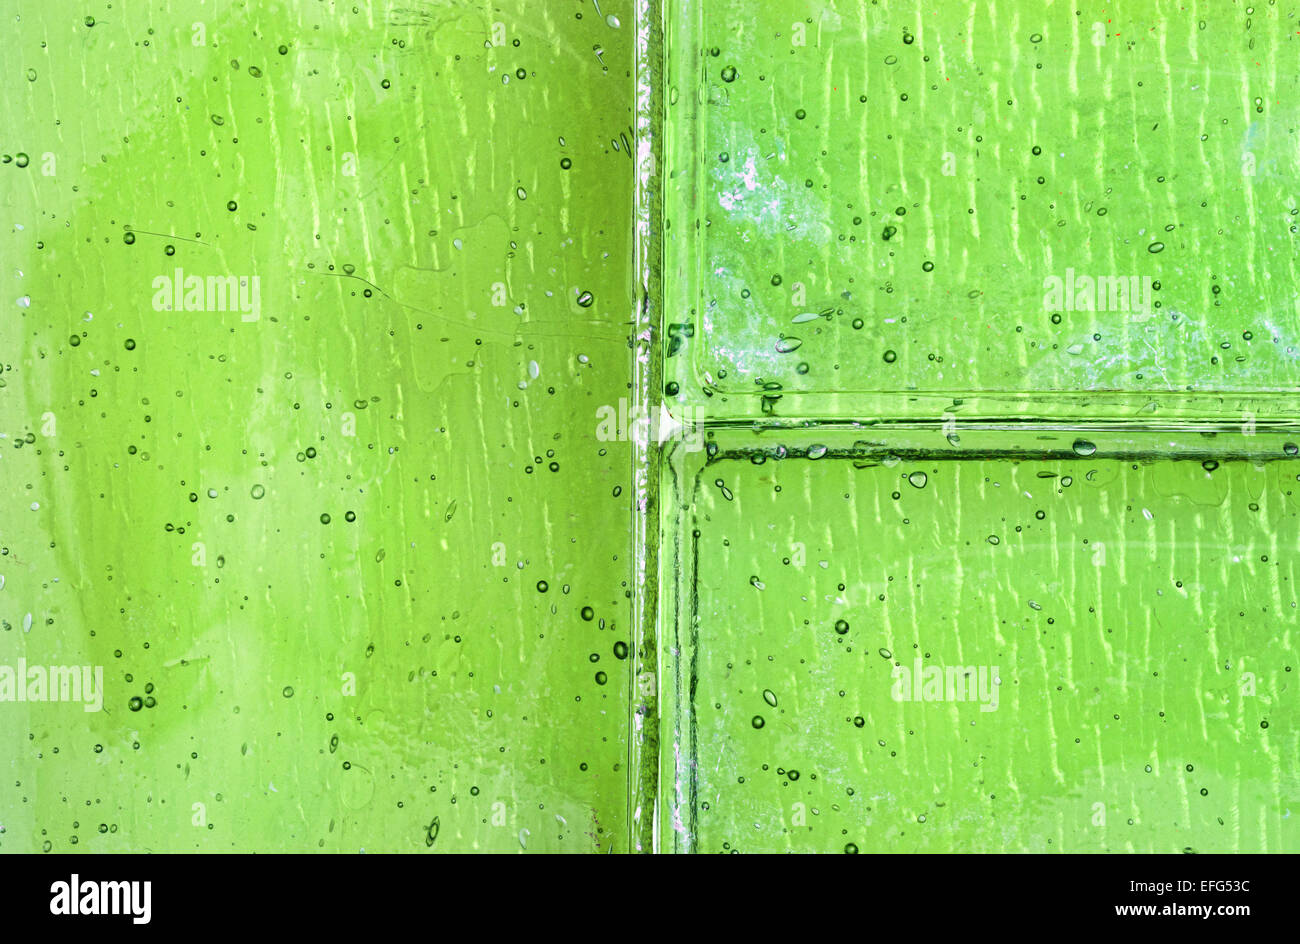 A very close view of green tinted glass tiles with air bubbles. Stock Photo